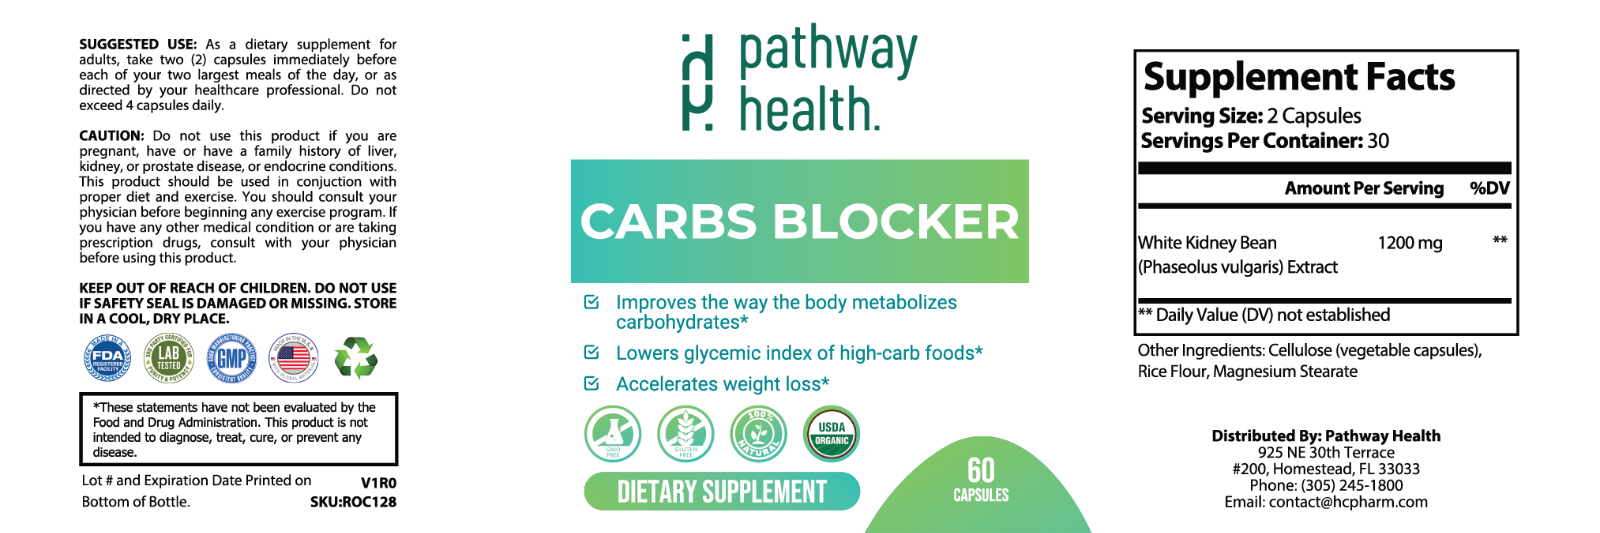 Carbs Blocker - Supports Weight Lose